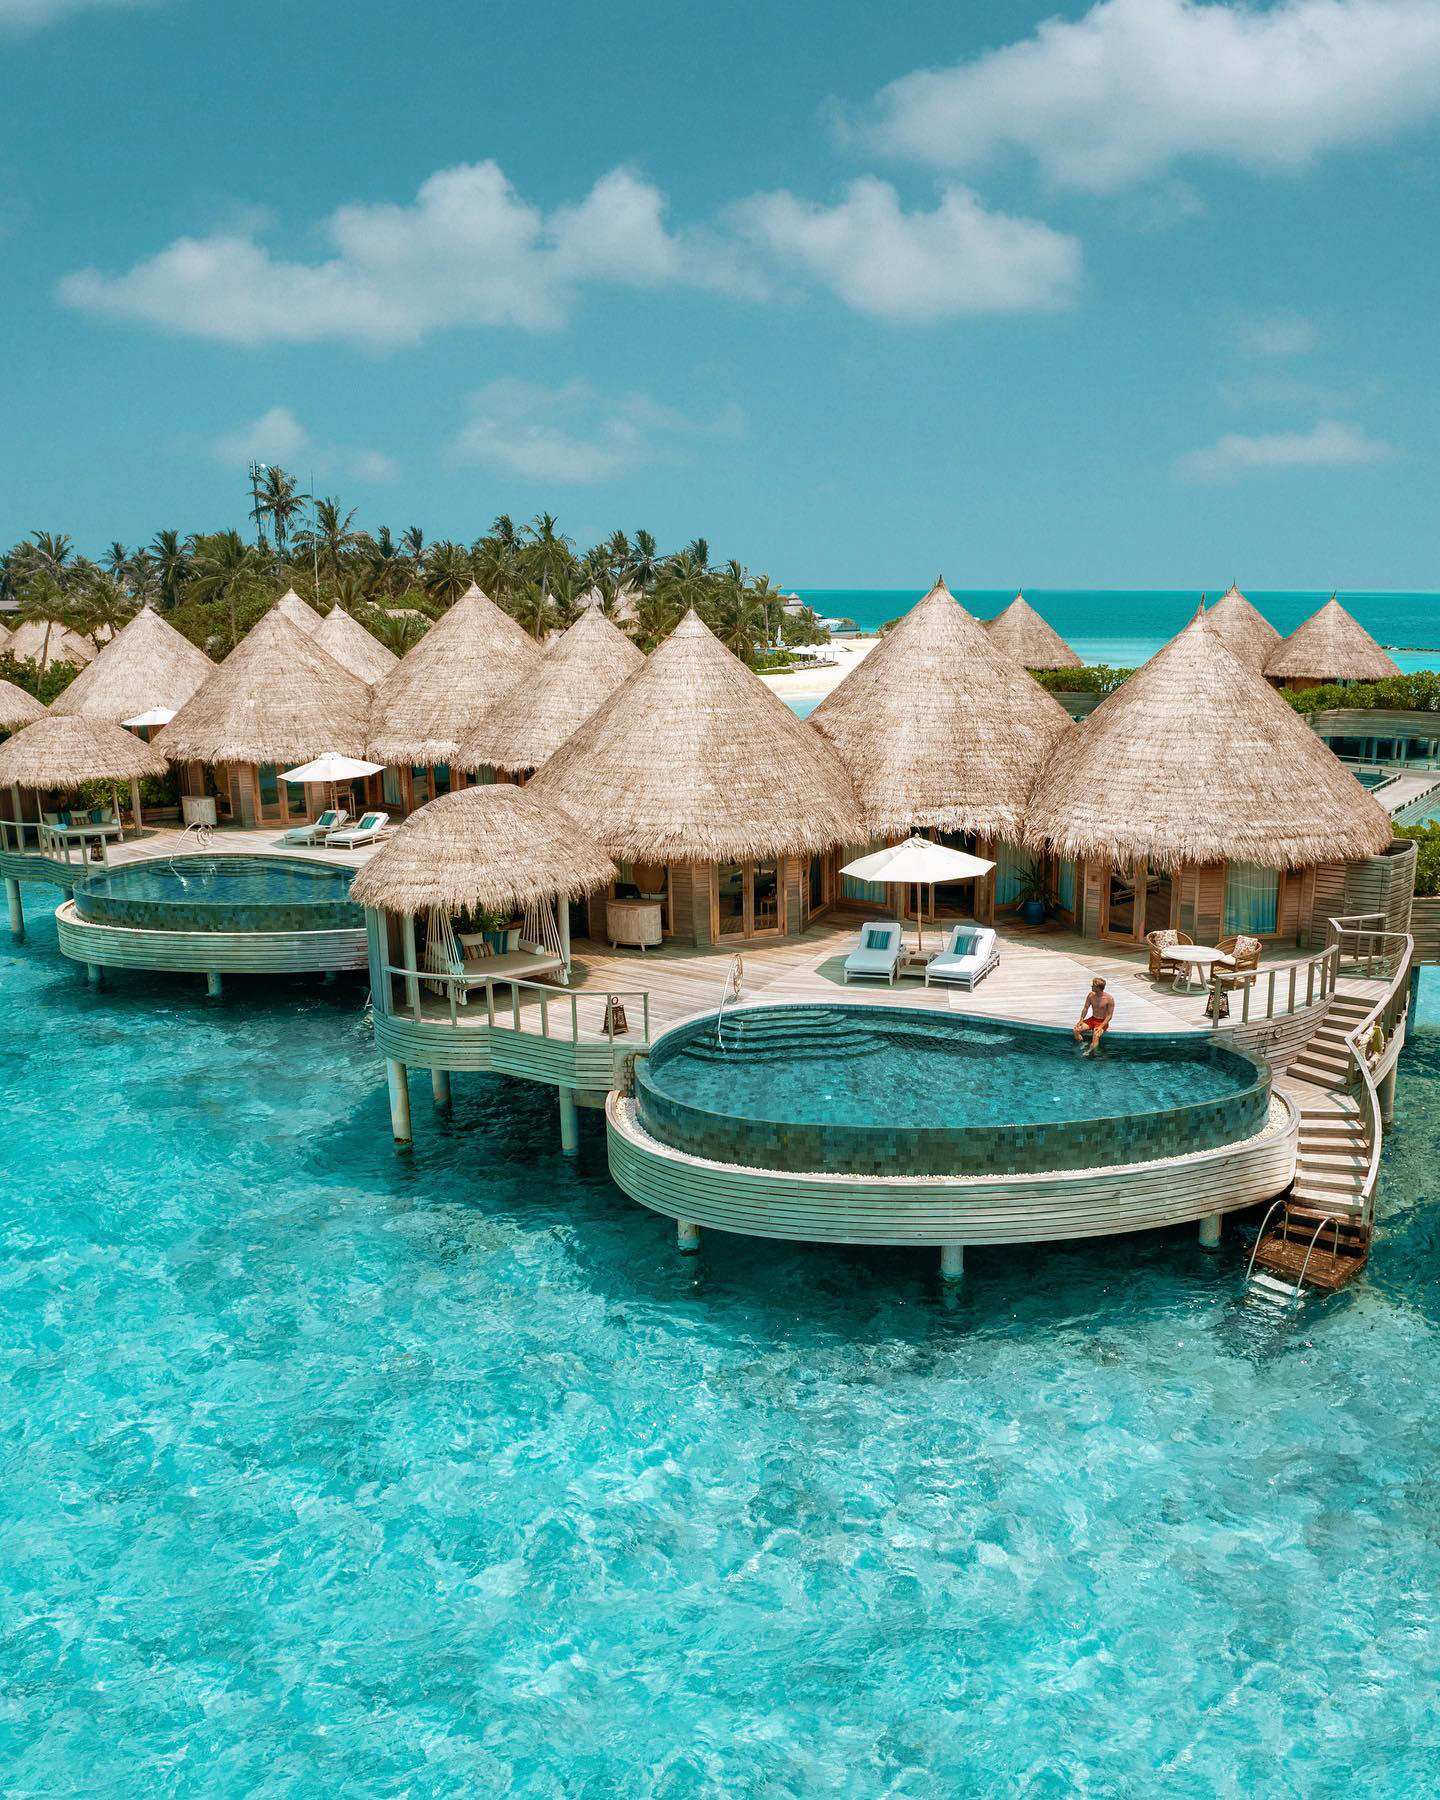 image  1 ➳ 	Λ L E X - Feels so good to be back at the most exclusive resort in the Maldives